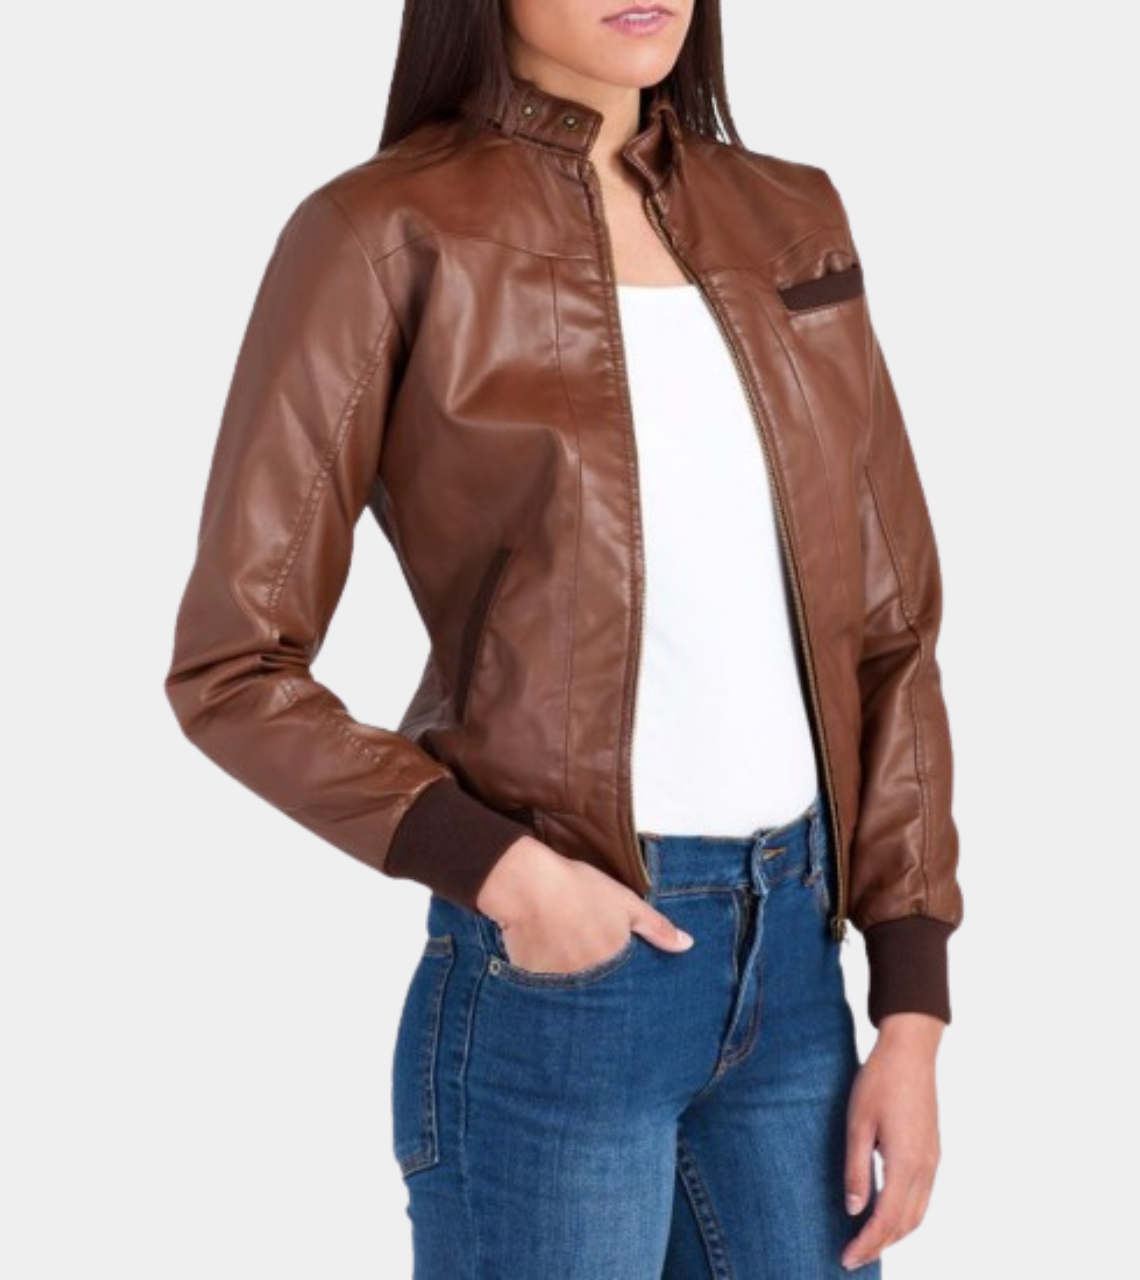 Brown Leather Bomber Jacket For Women's